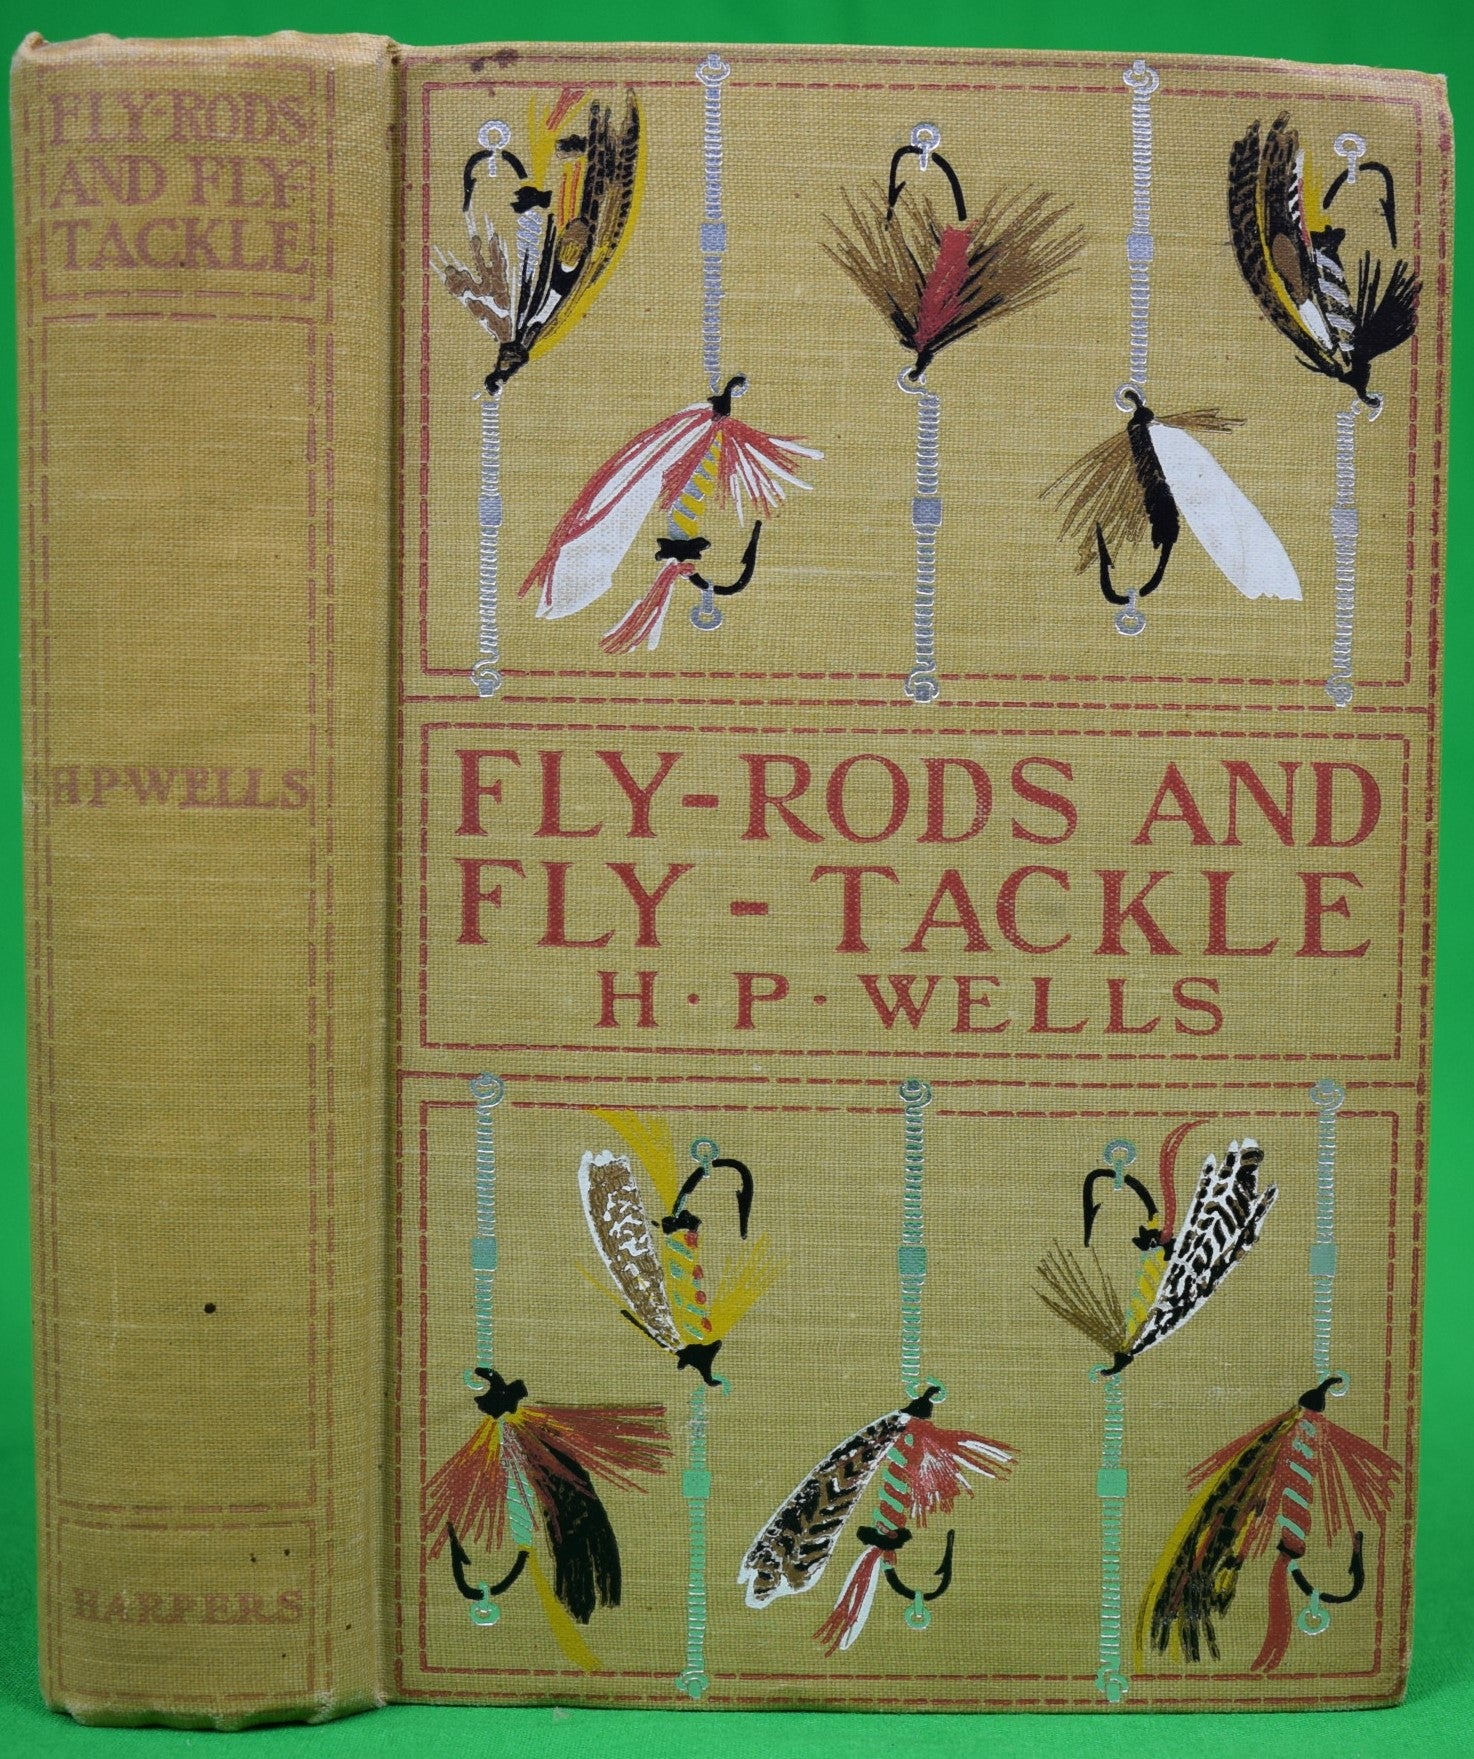 Fly-Rods And Fly-Tackle 1901 WELLS, Henry P.